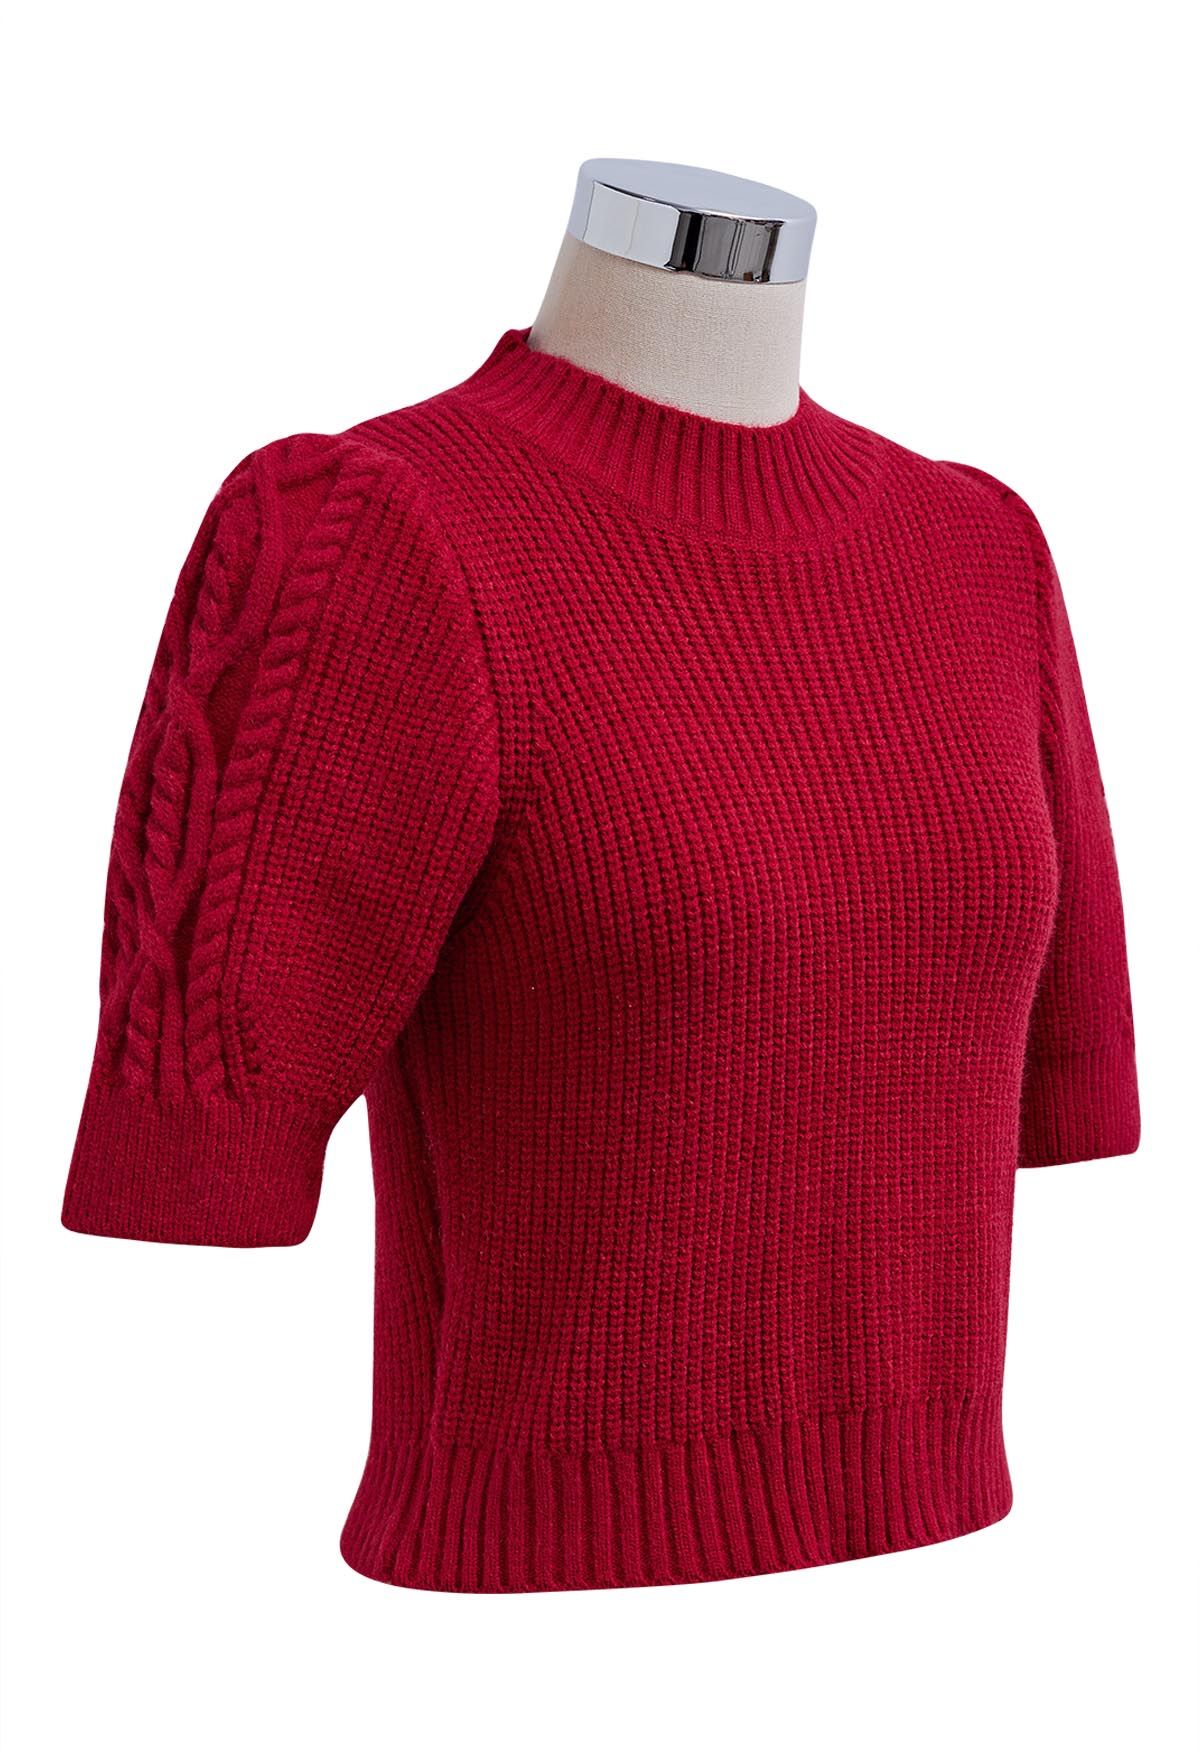 Mock Neck Short Sleeve Knit Sweater in Red - Retro, Indie and Unique Fashion